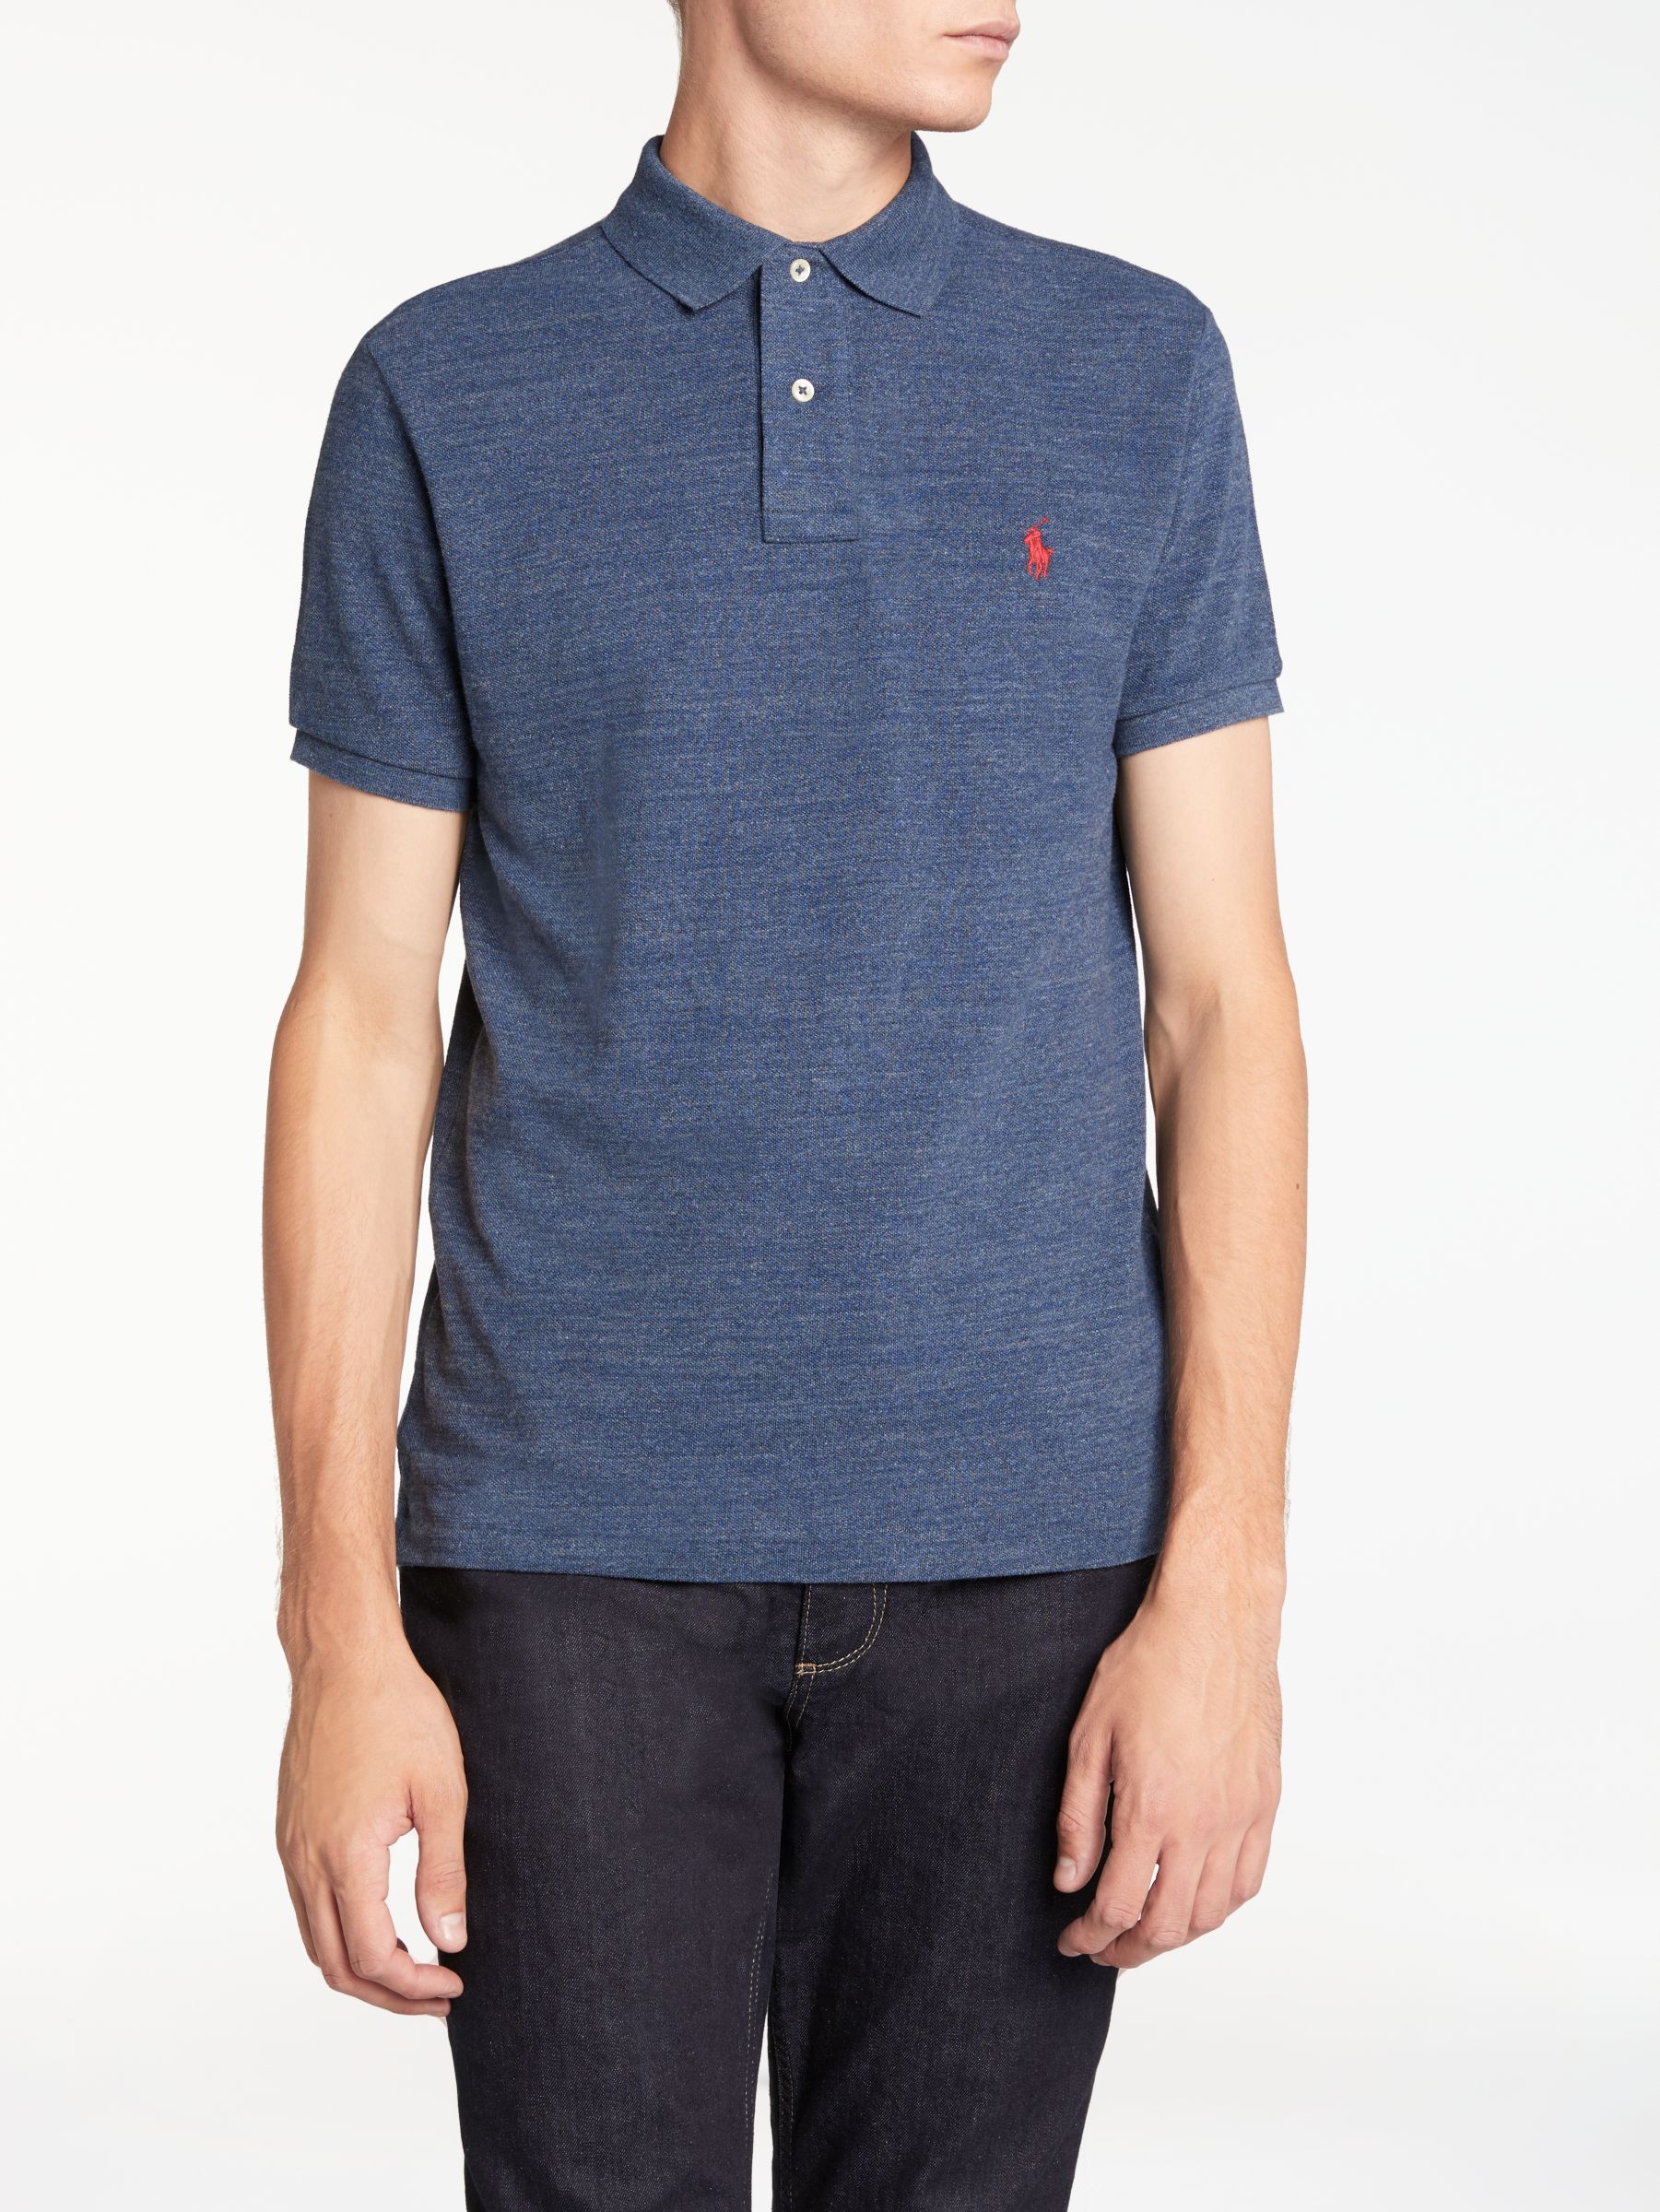 polo classic fit shirts